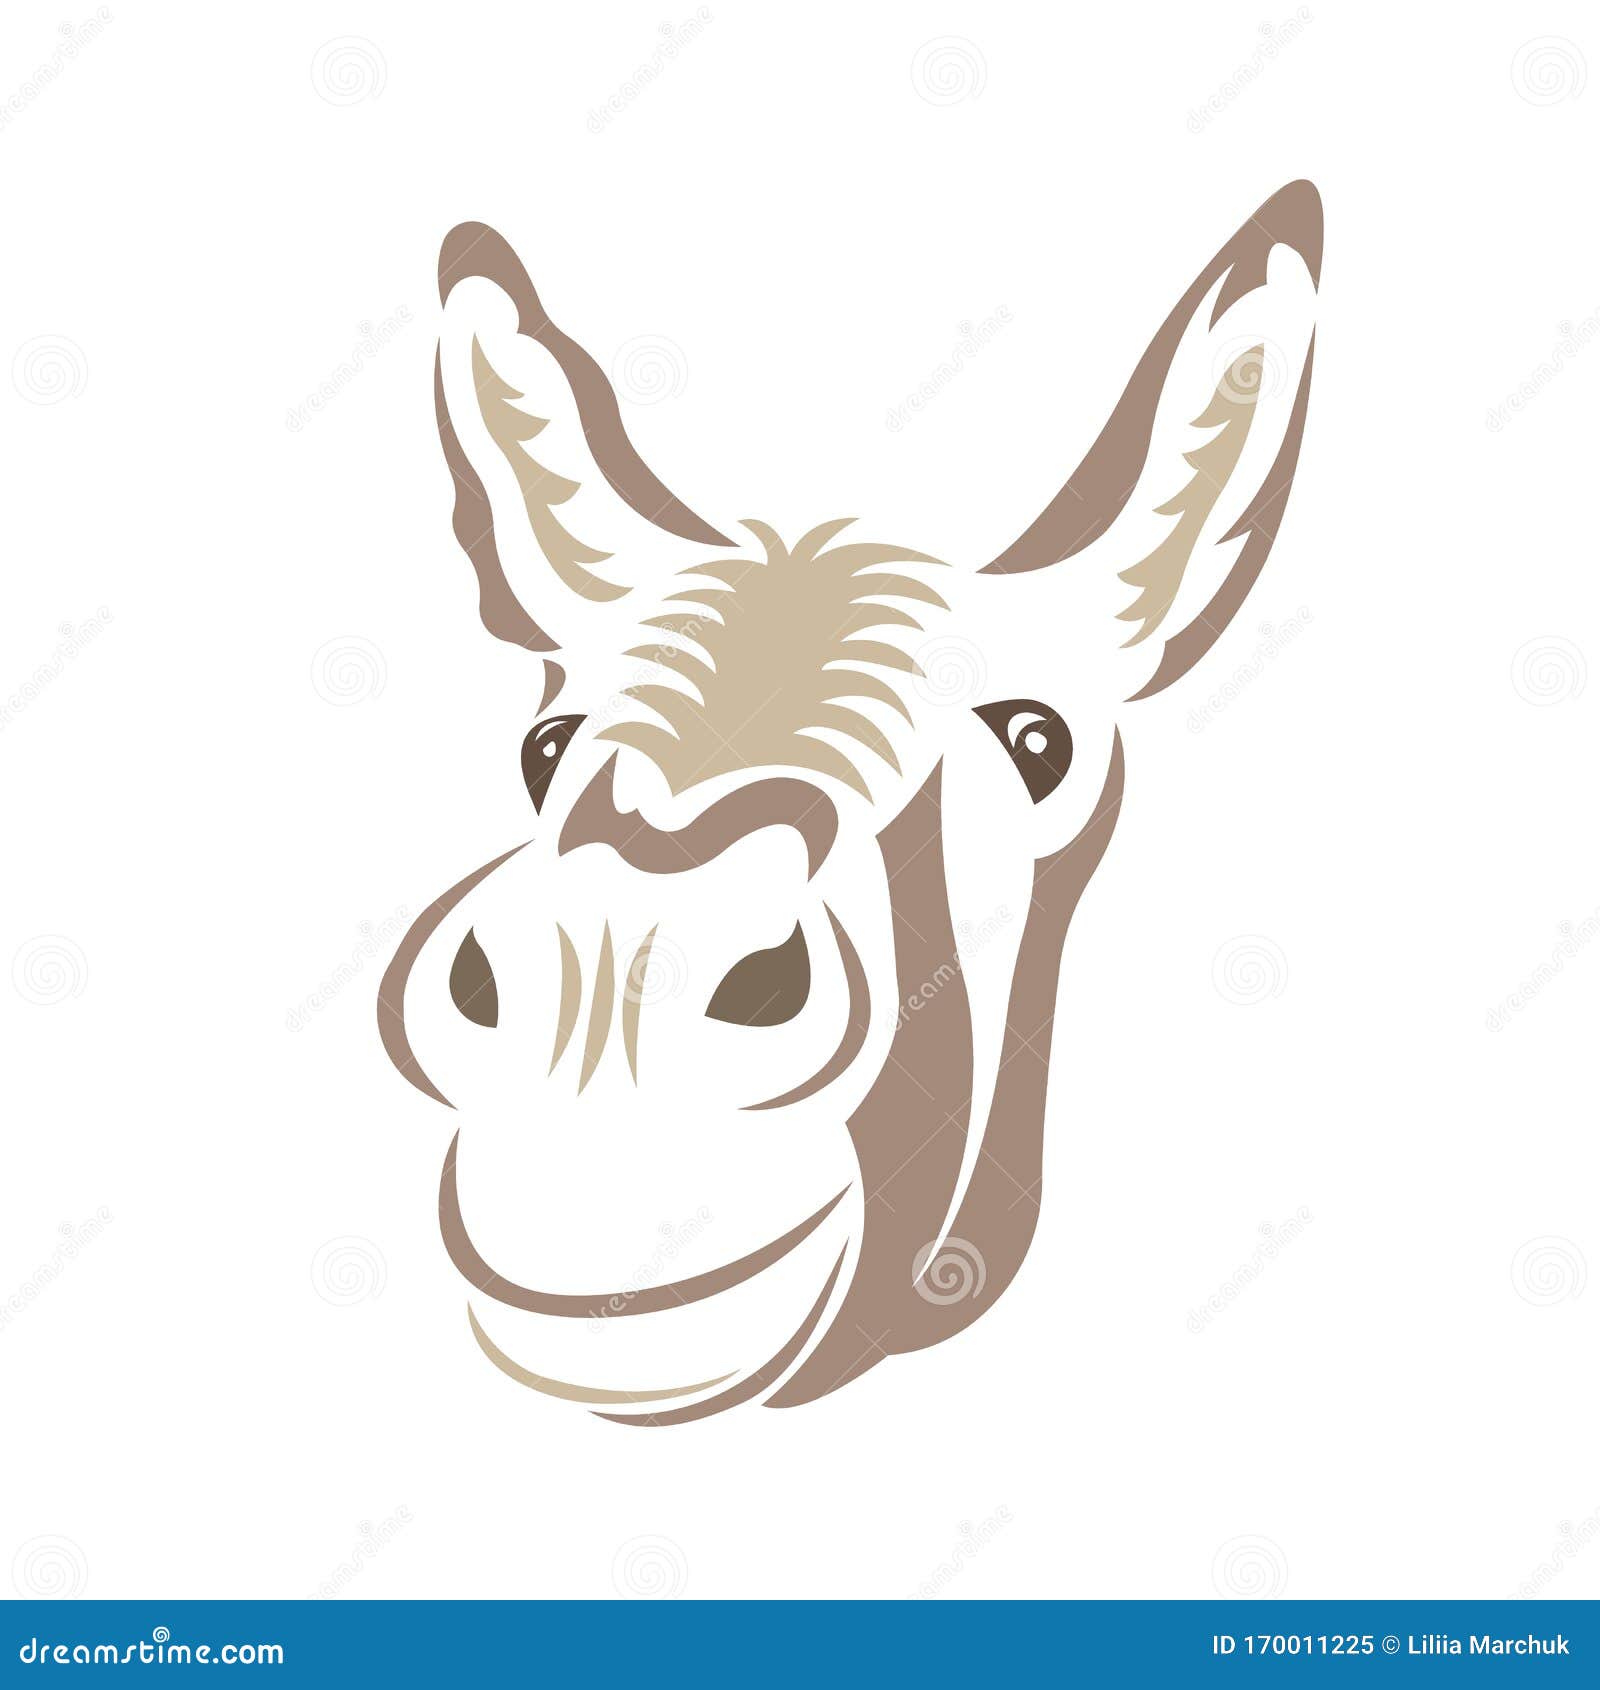 The Silhouette of a Muzzle of a Donkey is Drawn in Brown by Various